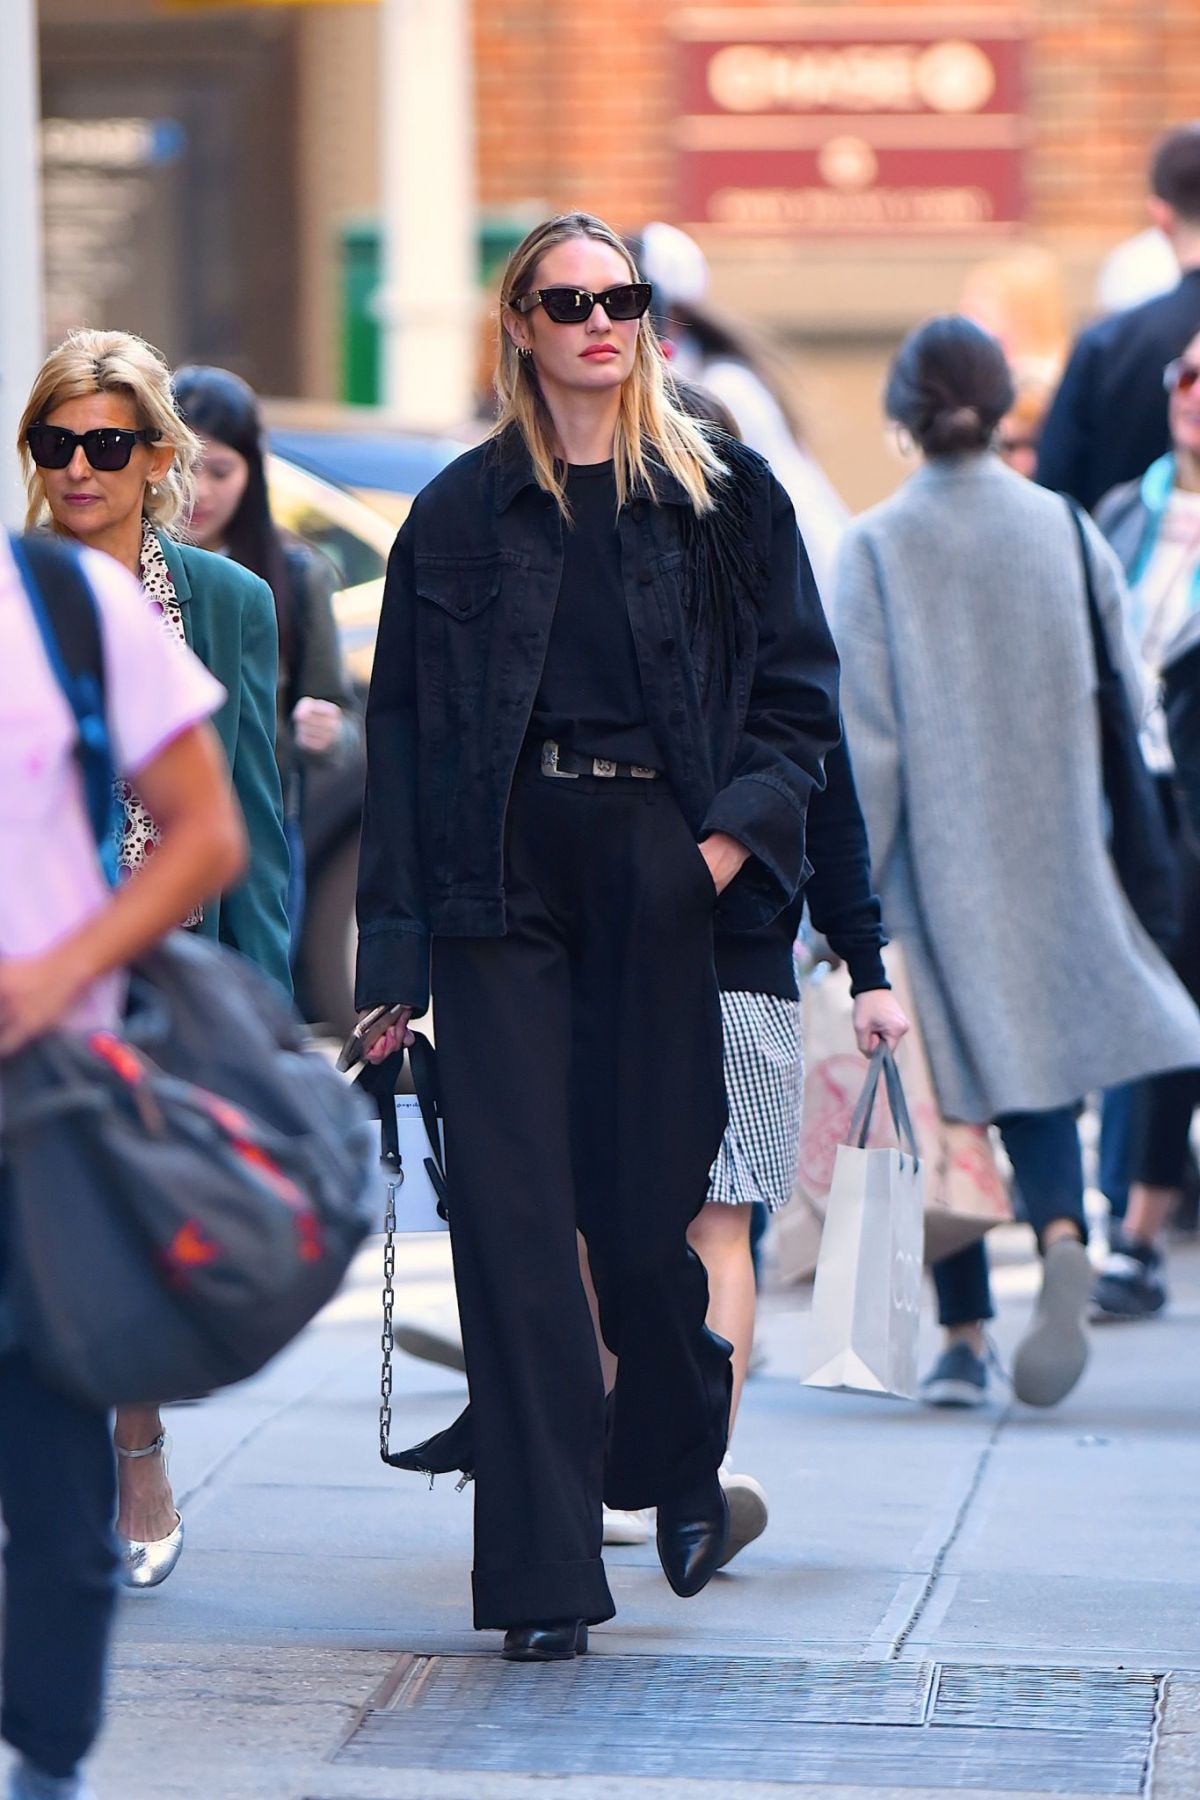 candice-swanepoel-out-and-about-in-new-york-04-24-2019-1.jpg